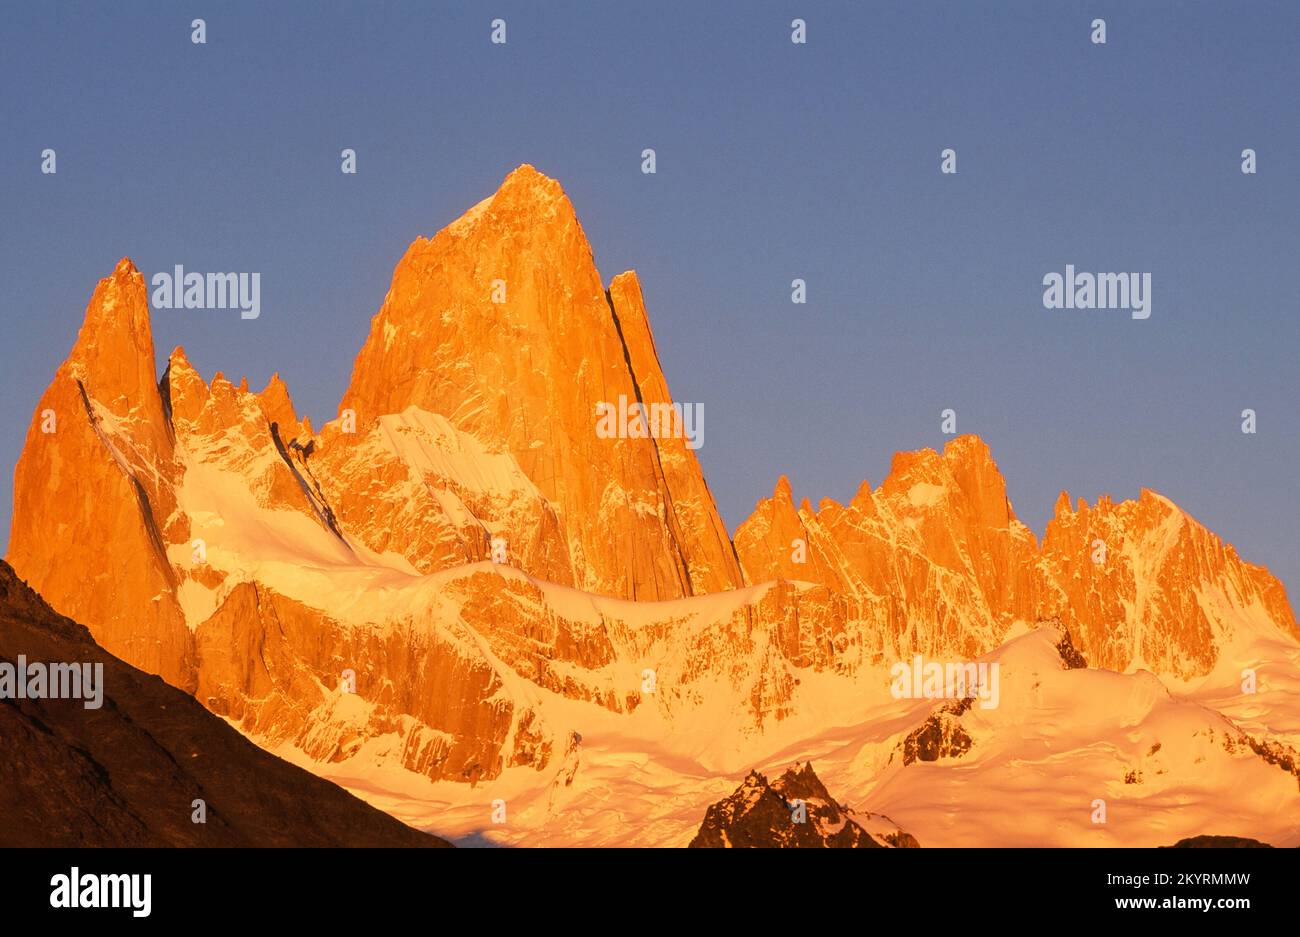 ARGENTINA. PATAGONIA. LOS GLACIARES NATIONAL PARK. EL CHALTEN. THE FITZ ROY (3,441 M) AND CERRO TORRE (3,138 M) MOUNTAINS. A MOUNTAINEERING PARADISE, Stock Photo